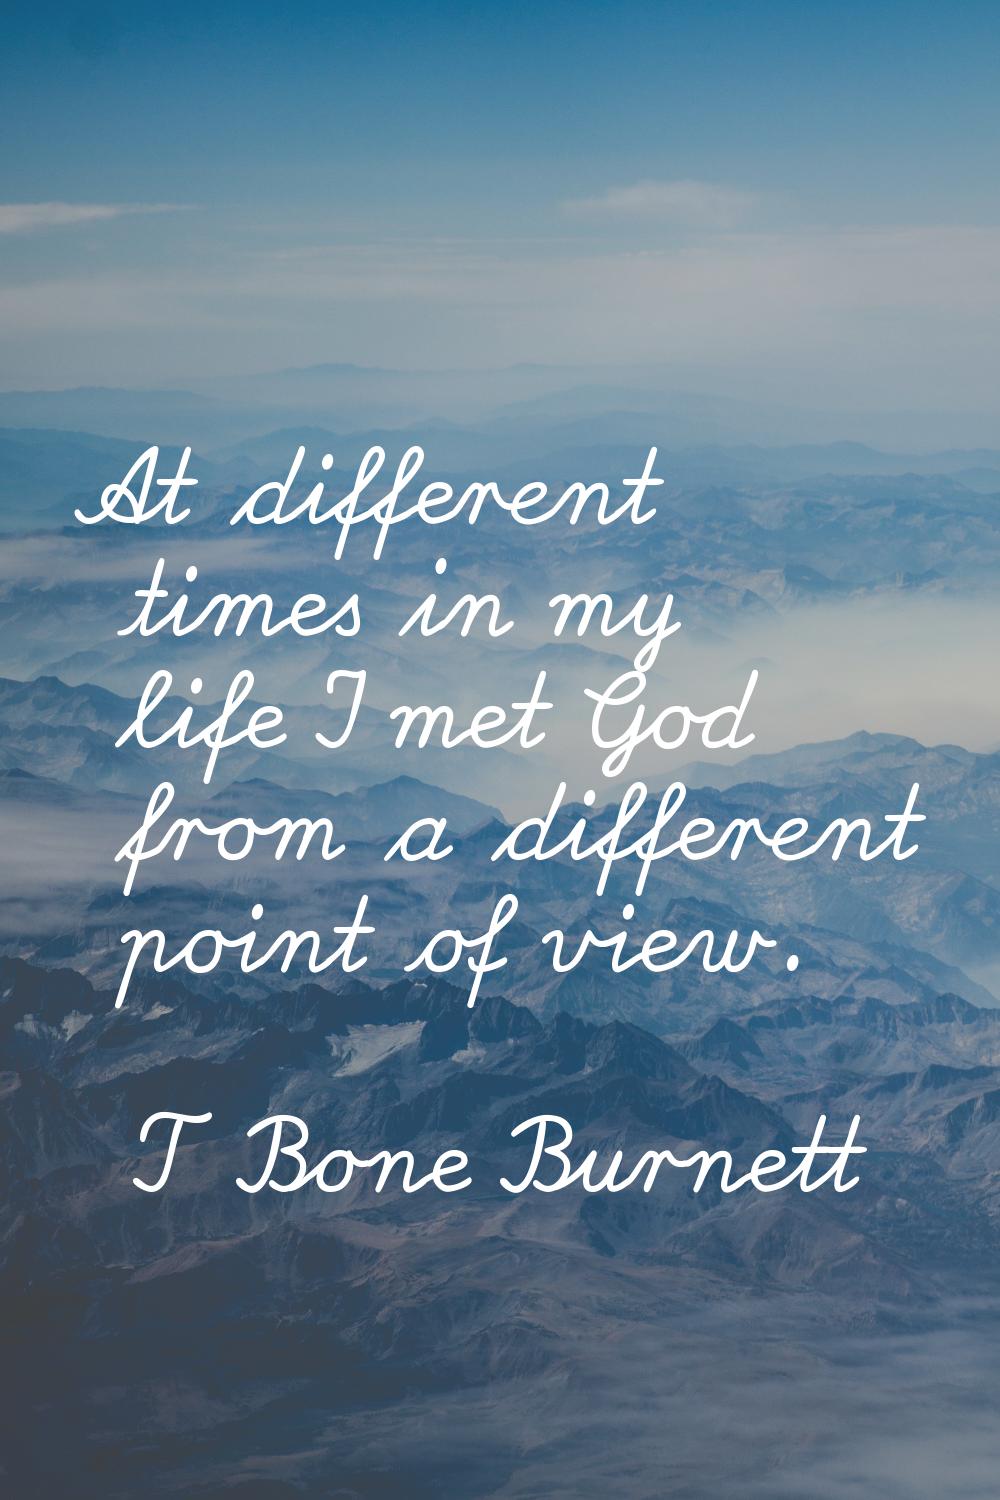 At different times in my life I met God from a different point of view.